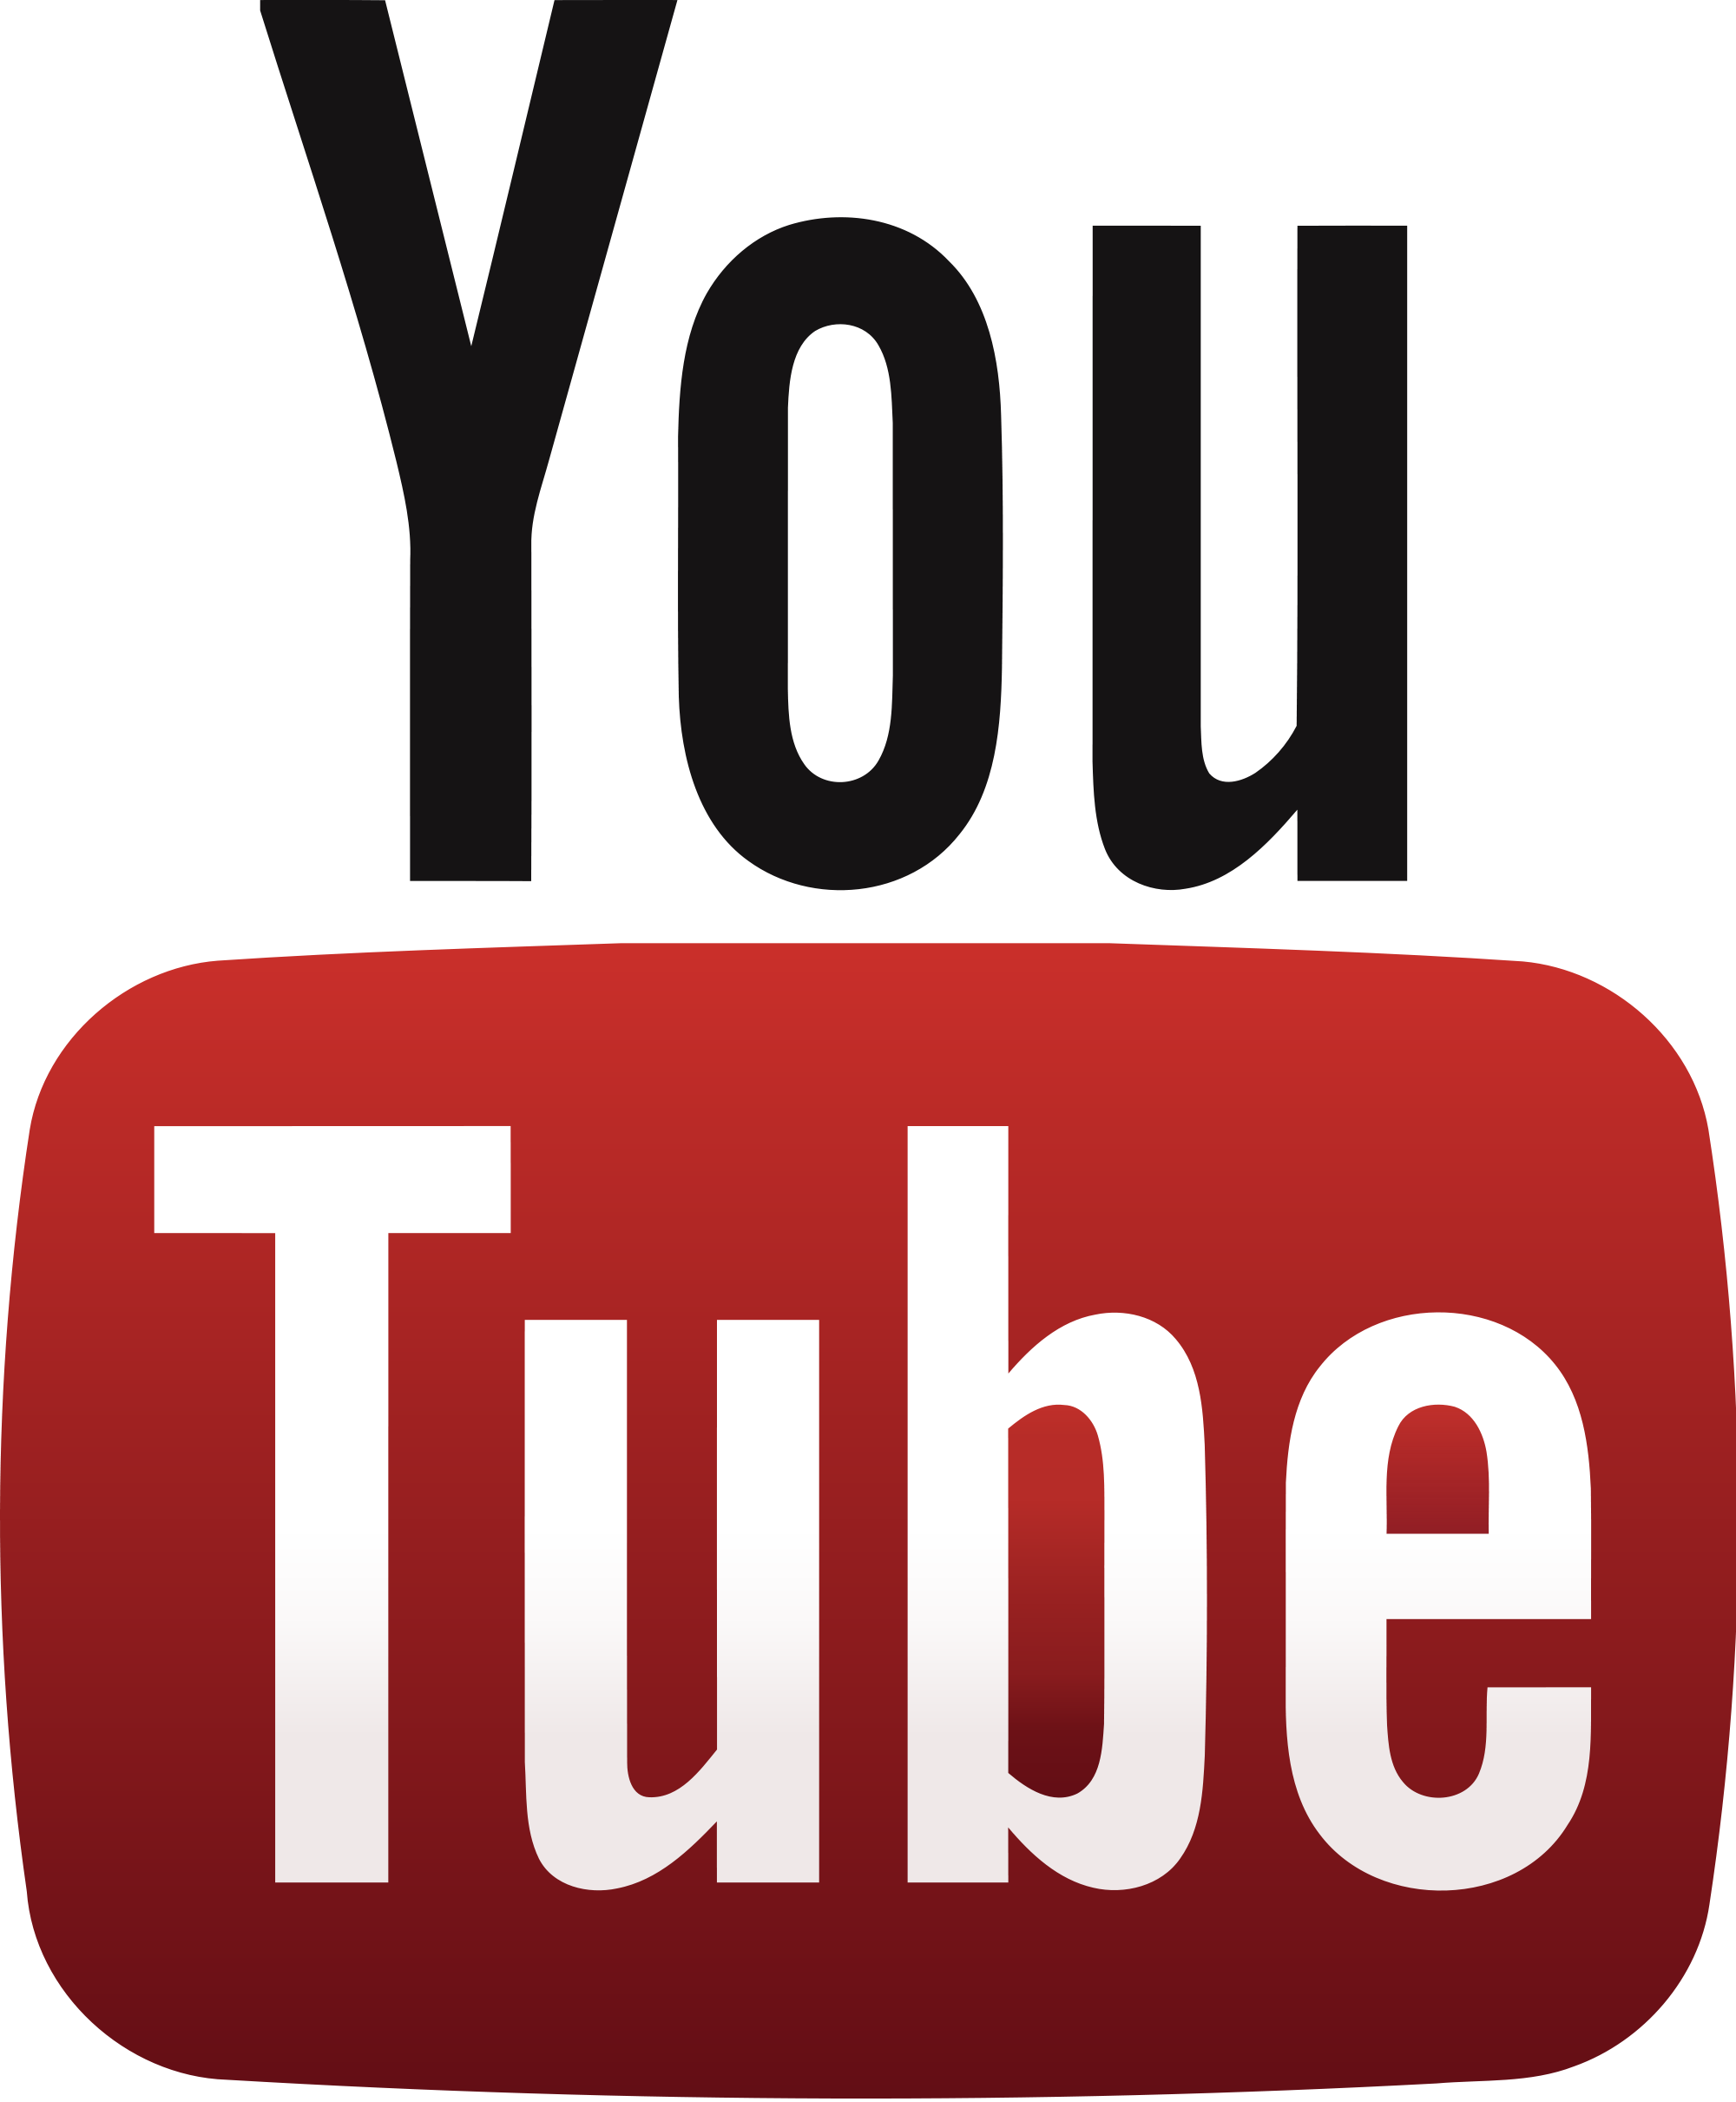 YouTube Logo - YouTube Transparent Background png download - 2000*2421 ...